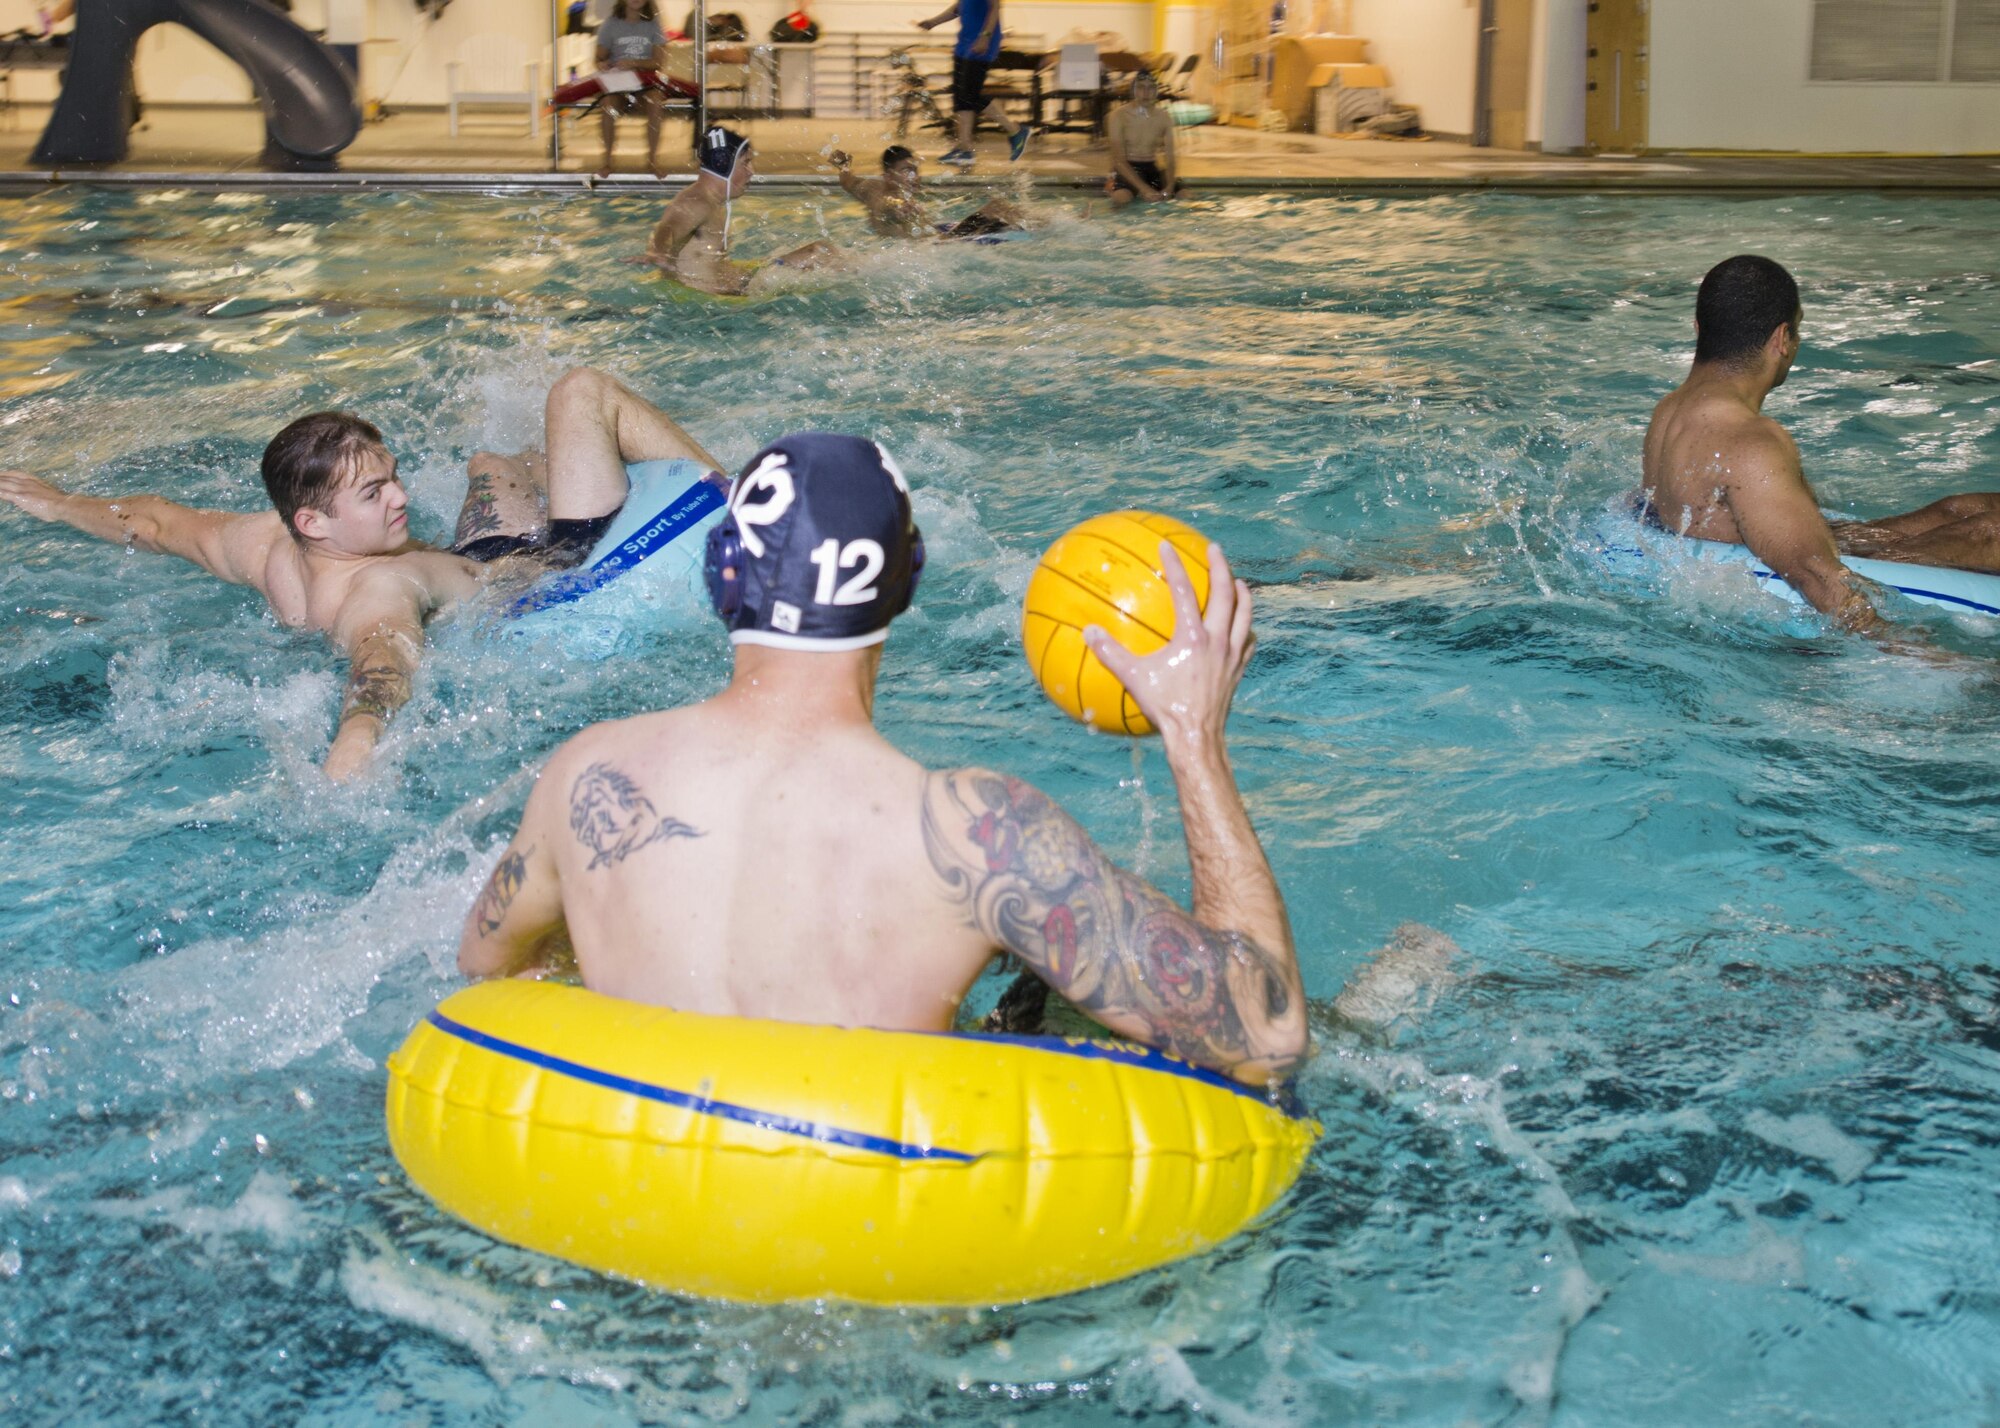 Team Minot Airmen compete in inner tube water polo during the Summer Games at Minot Air Force Base, N.D., Aug. 30, 2016. More than 300 Airmen competed in this year’s Summer Games for the coveted Commander’s Trophy. (U.S. Air Force photo/Airman 1st Class J.T. Armstrong)